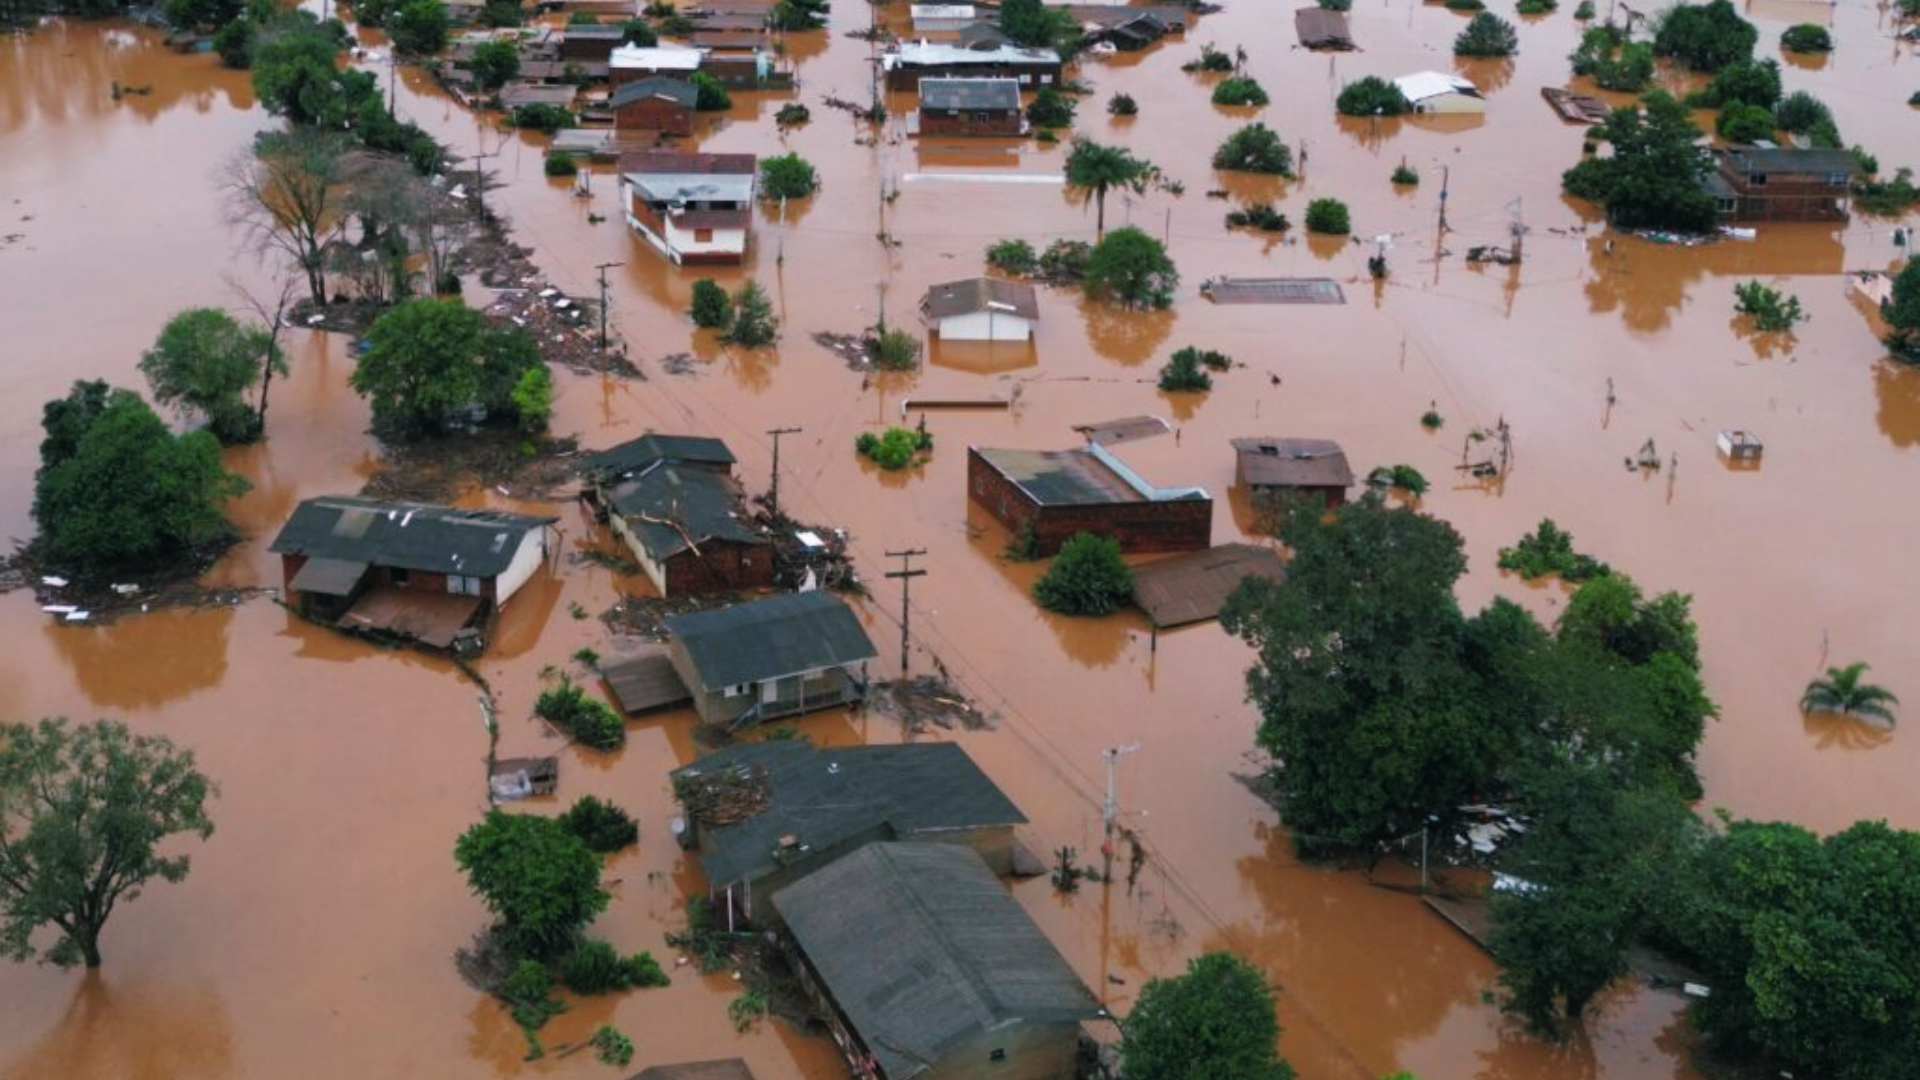 Deadly Rains And Mudslides Claim 37 Lives In Brazil’s Southern Region